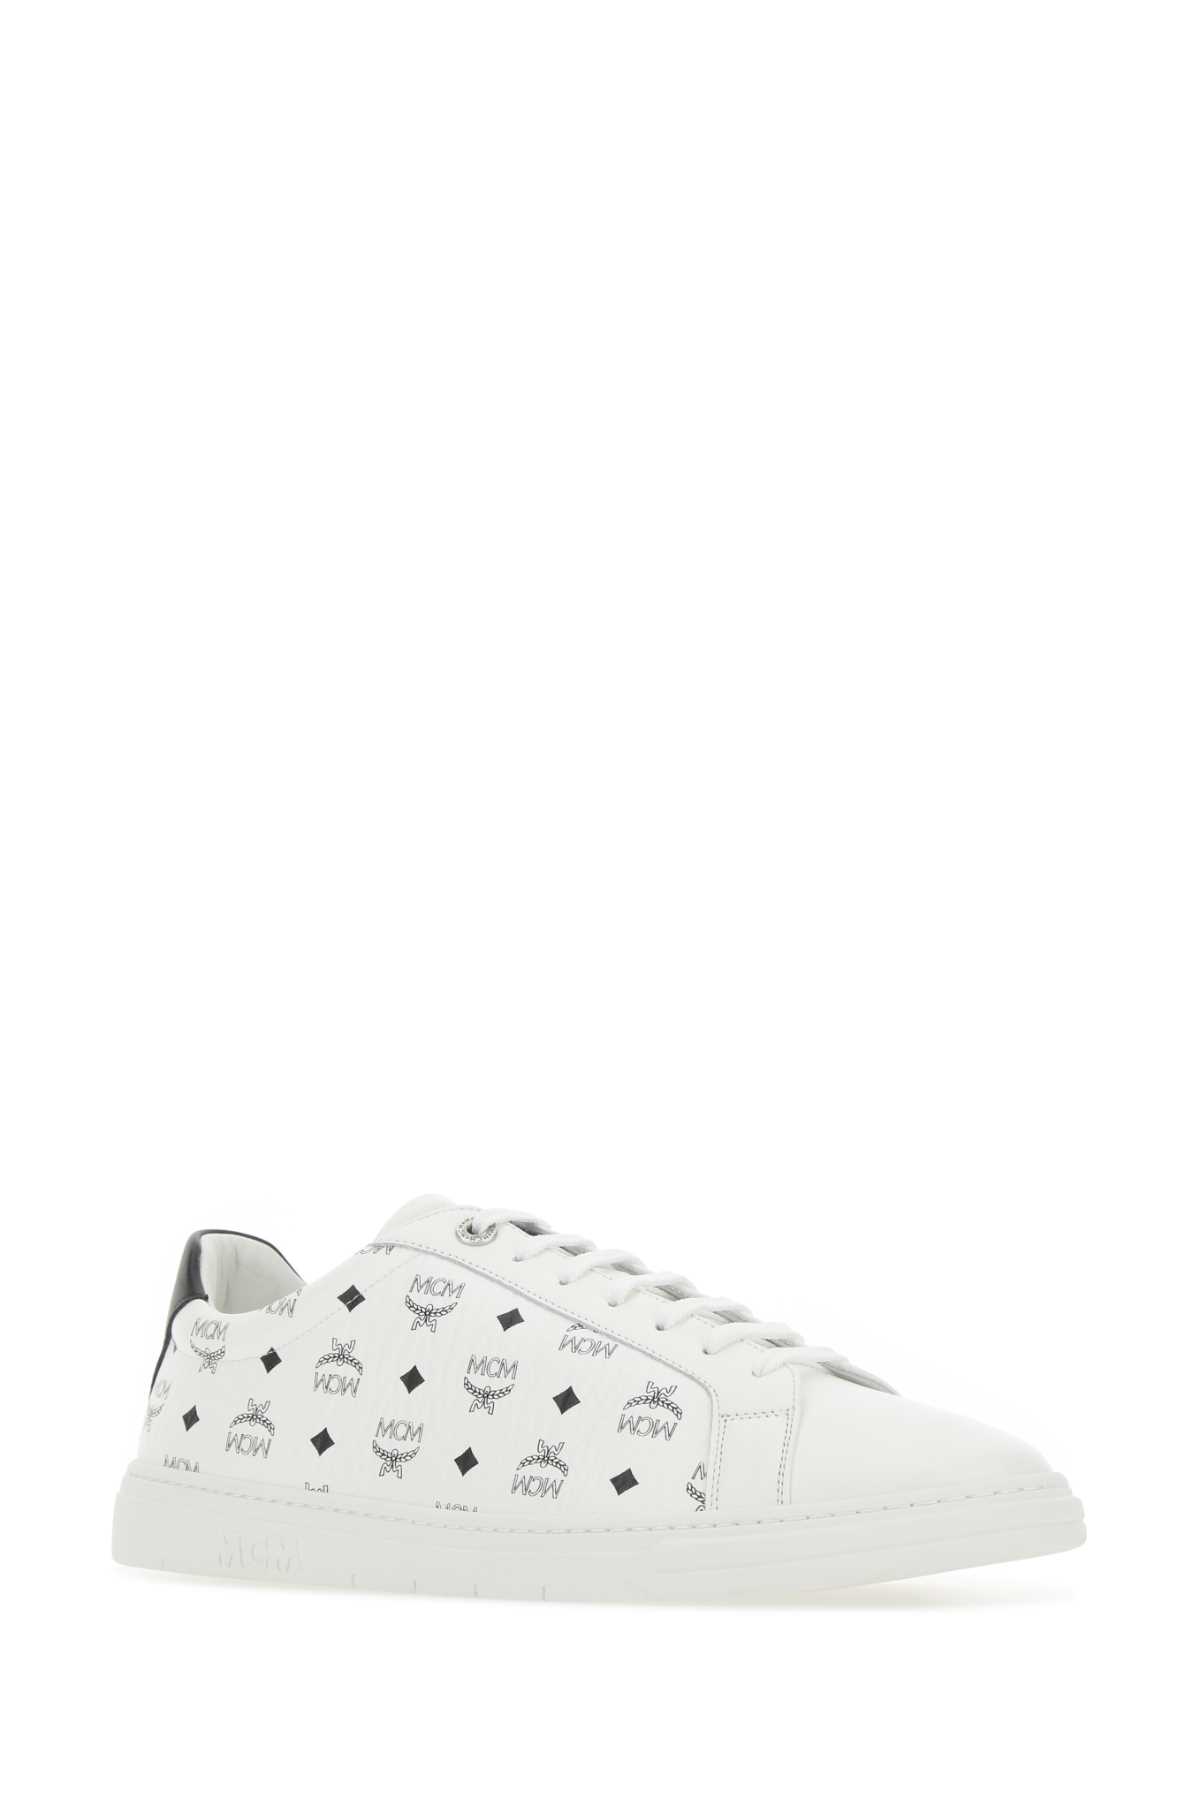 Mcm White Canvas And Leather Terrain Trainers